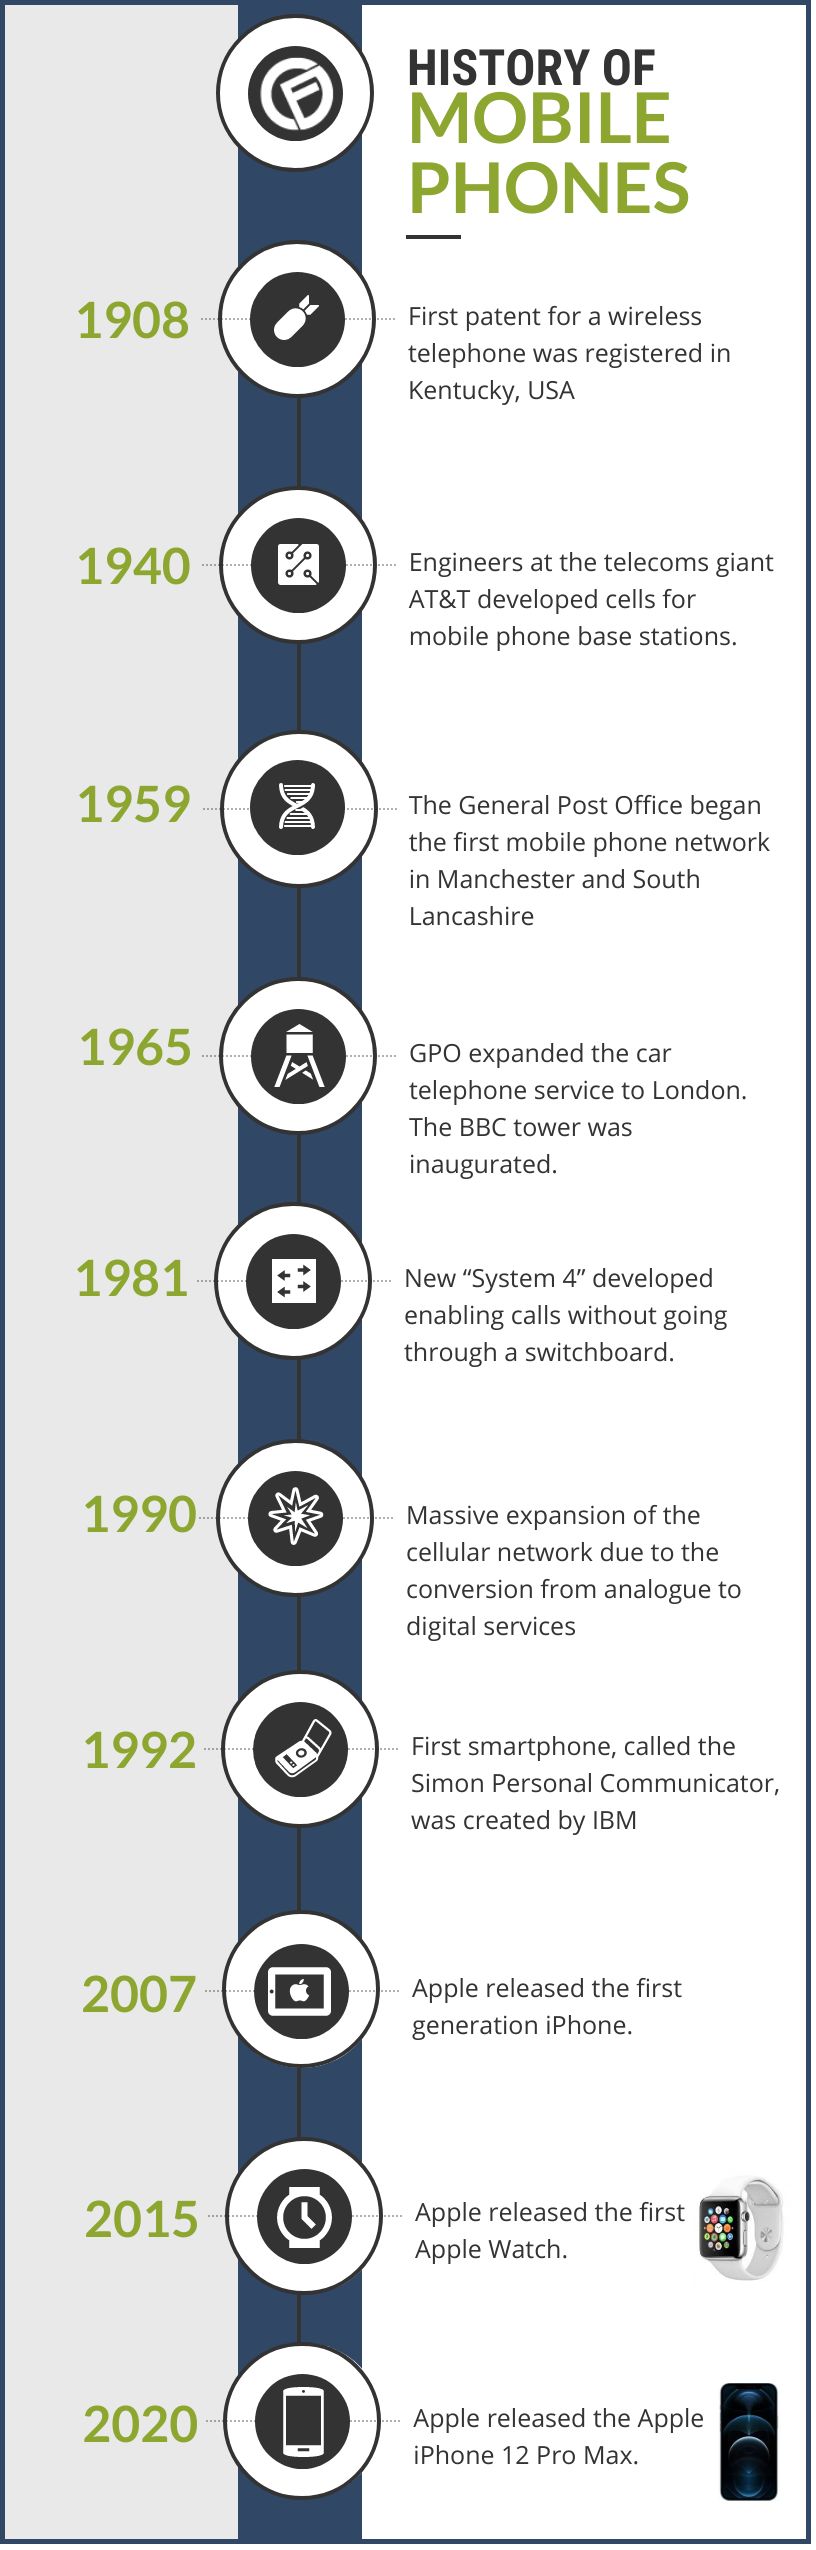 History of mobile phone infographic - Cashfloat